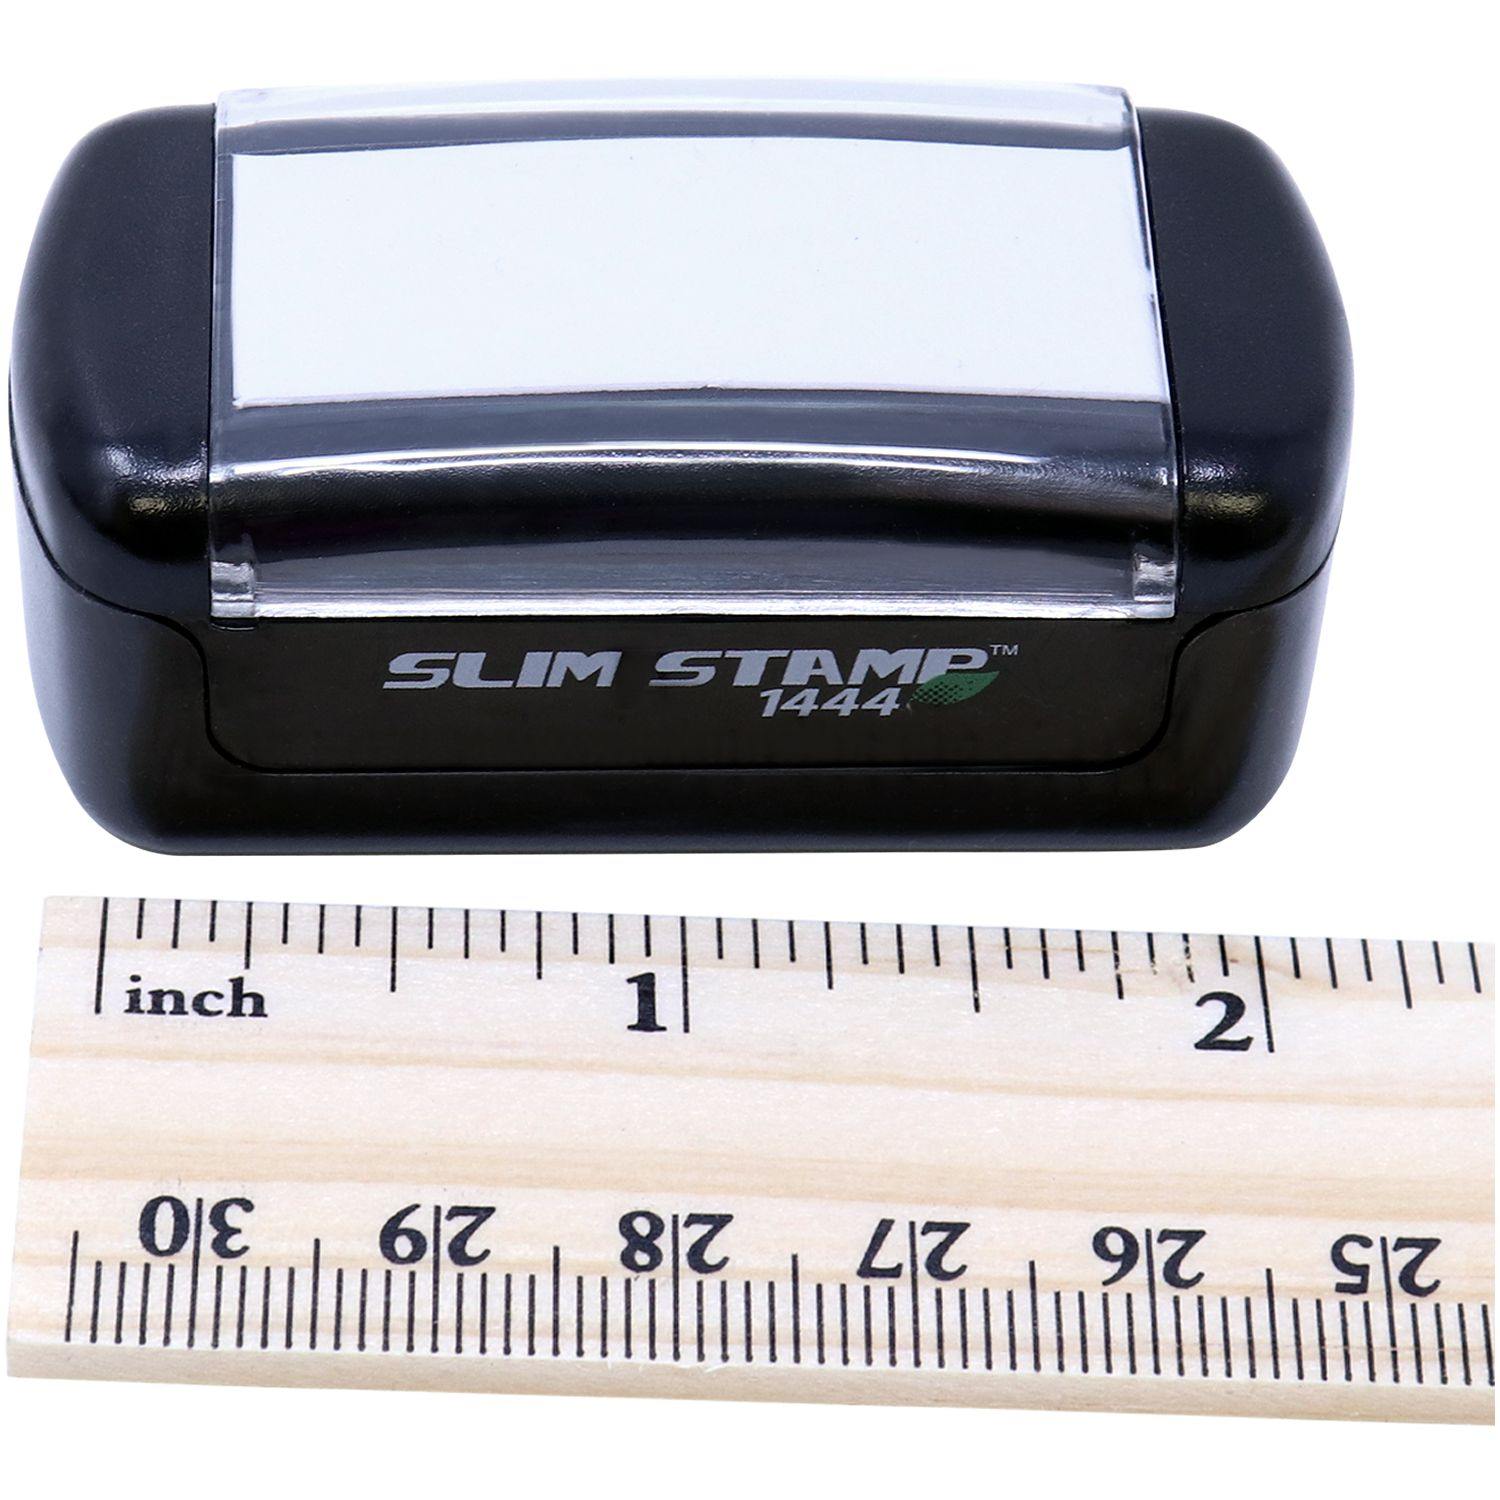 Measurement Slim Pre-Inked Please Review with your child Stamp with Ruler